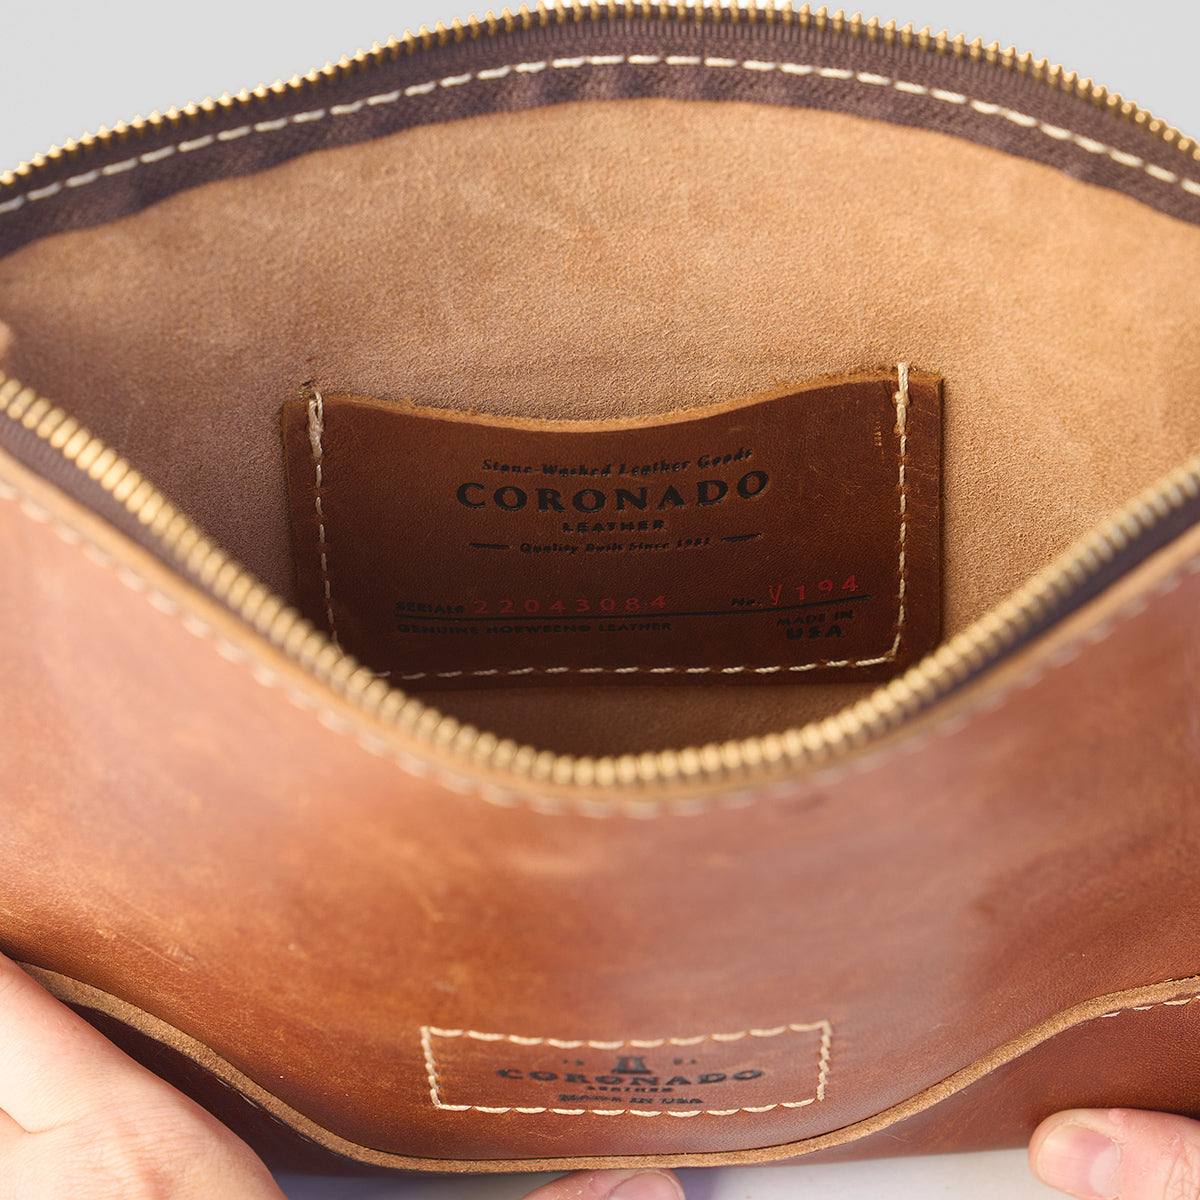 Rugged Leather Utility Pouch: Brown Color, Small Size - Copper River Bags